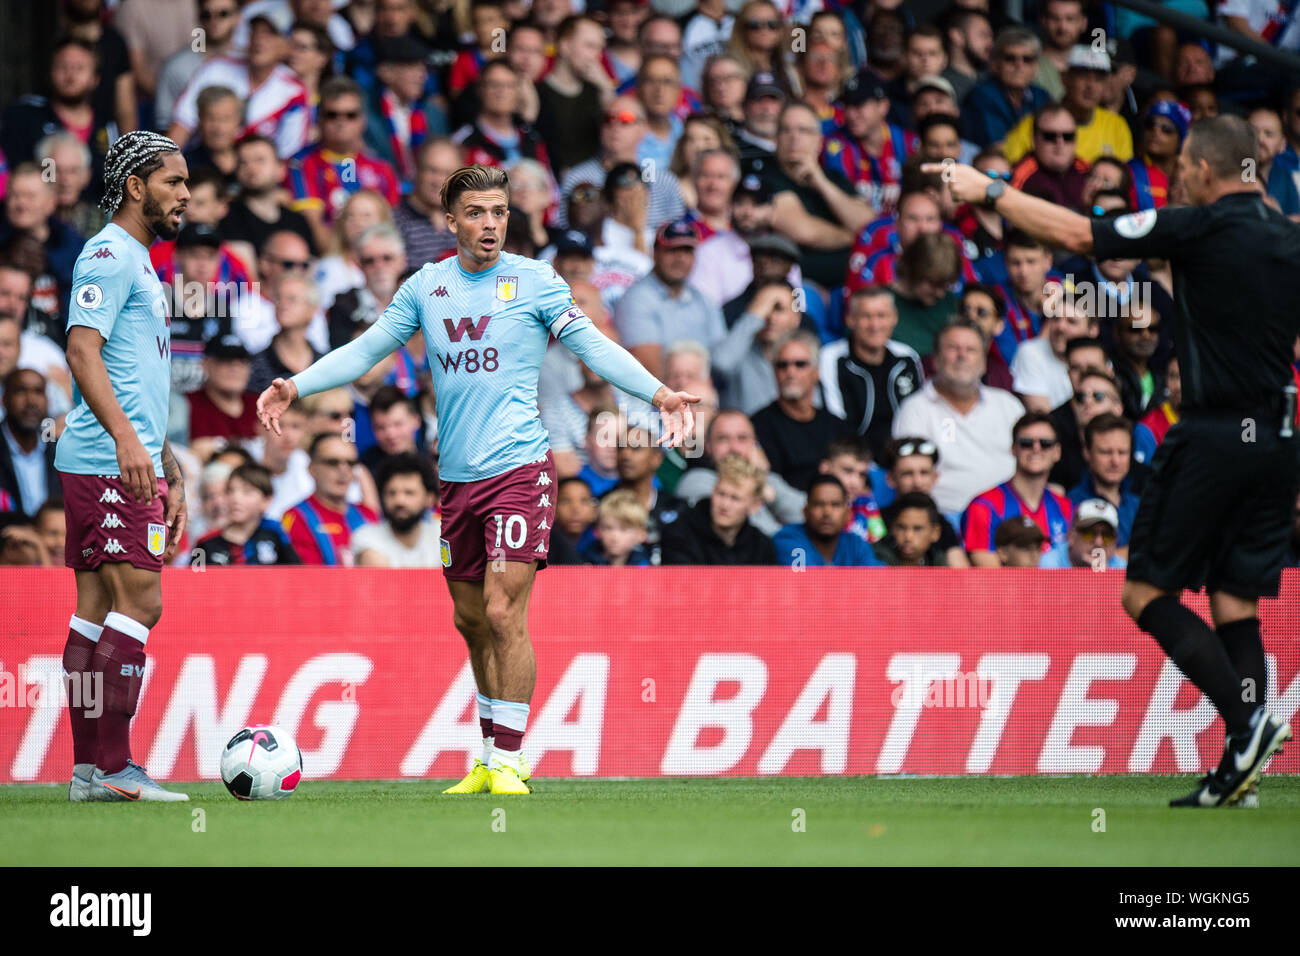 LONDON, ENGLAND - AUGUST 31: Jack Grealish and Douglas Luiz of Aston Villa and referee Kevin Friend during the Premier League match between Crystal Palace and Aston Villa at Selhurst Park on August 31, 2019 in London, United Kingdom. (Photo by Sebastian Frej/MB Media) Stock Photo